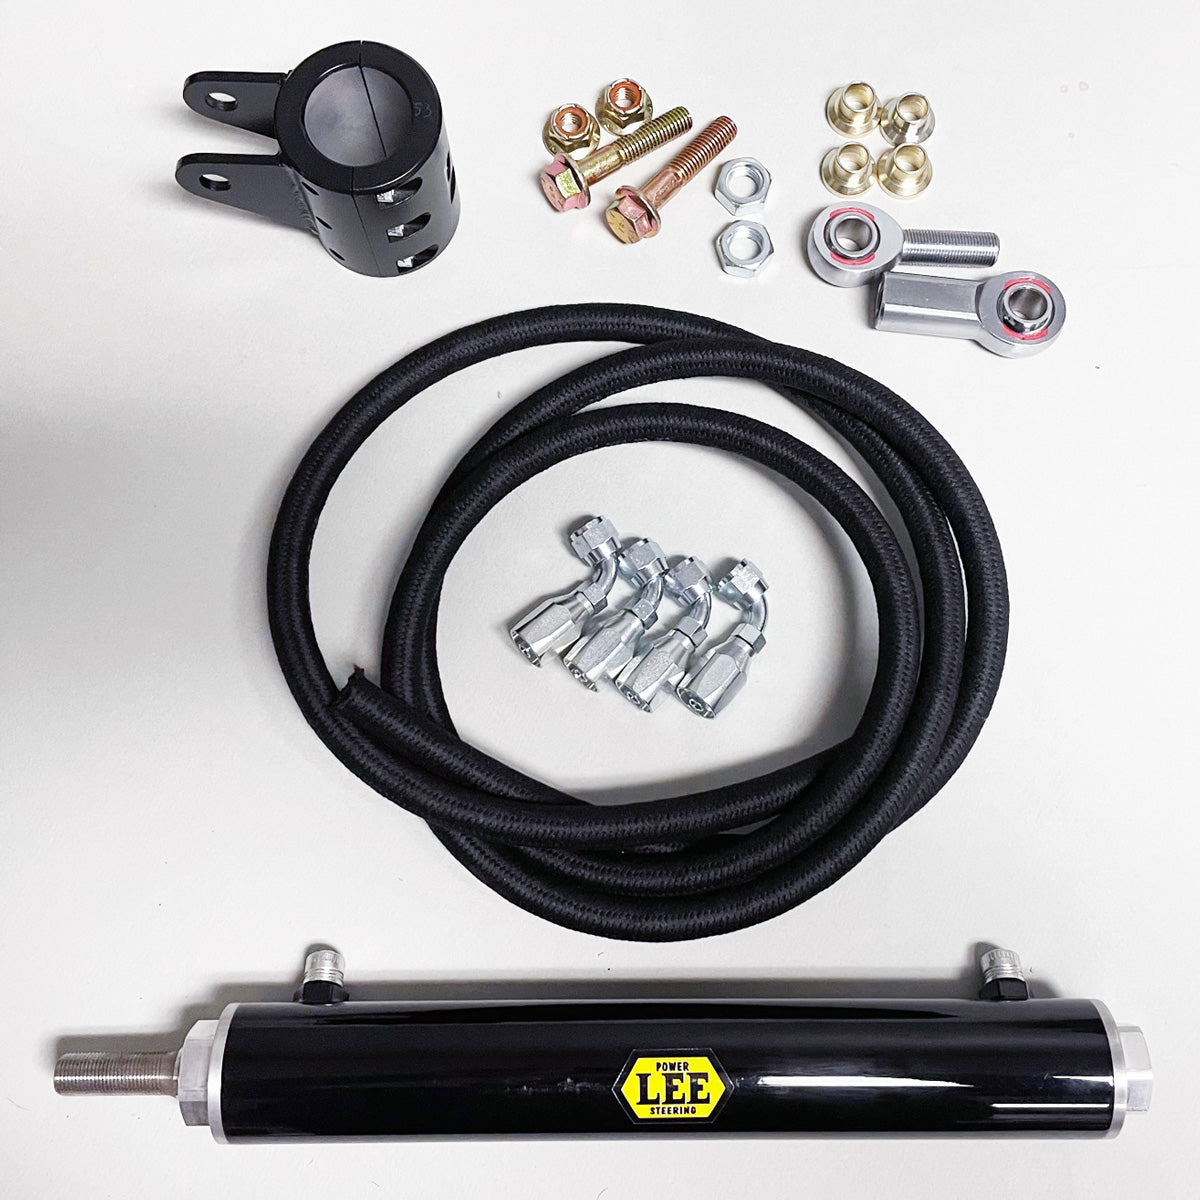 Lee's Ford Hydraulic RAM Assist Cylinder with Tie Rod Clamp and Hose Kit